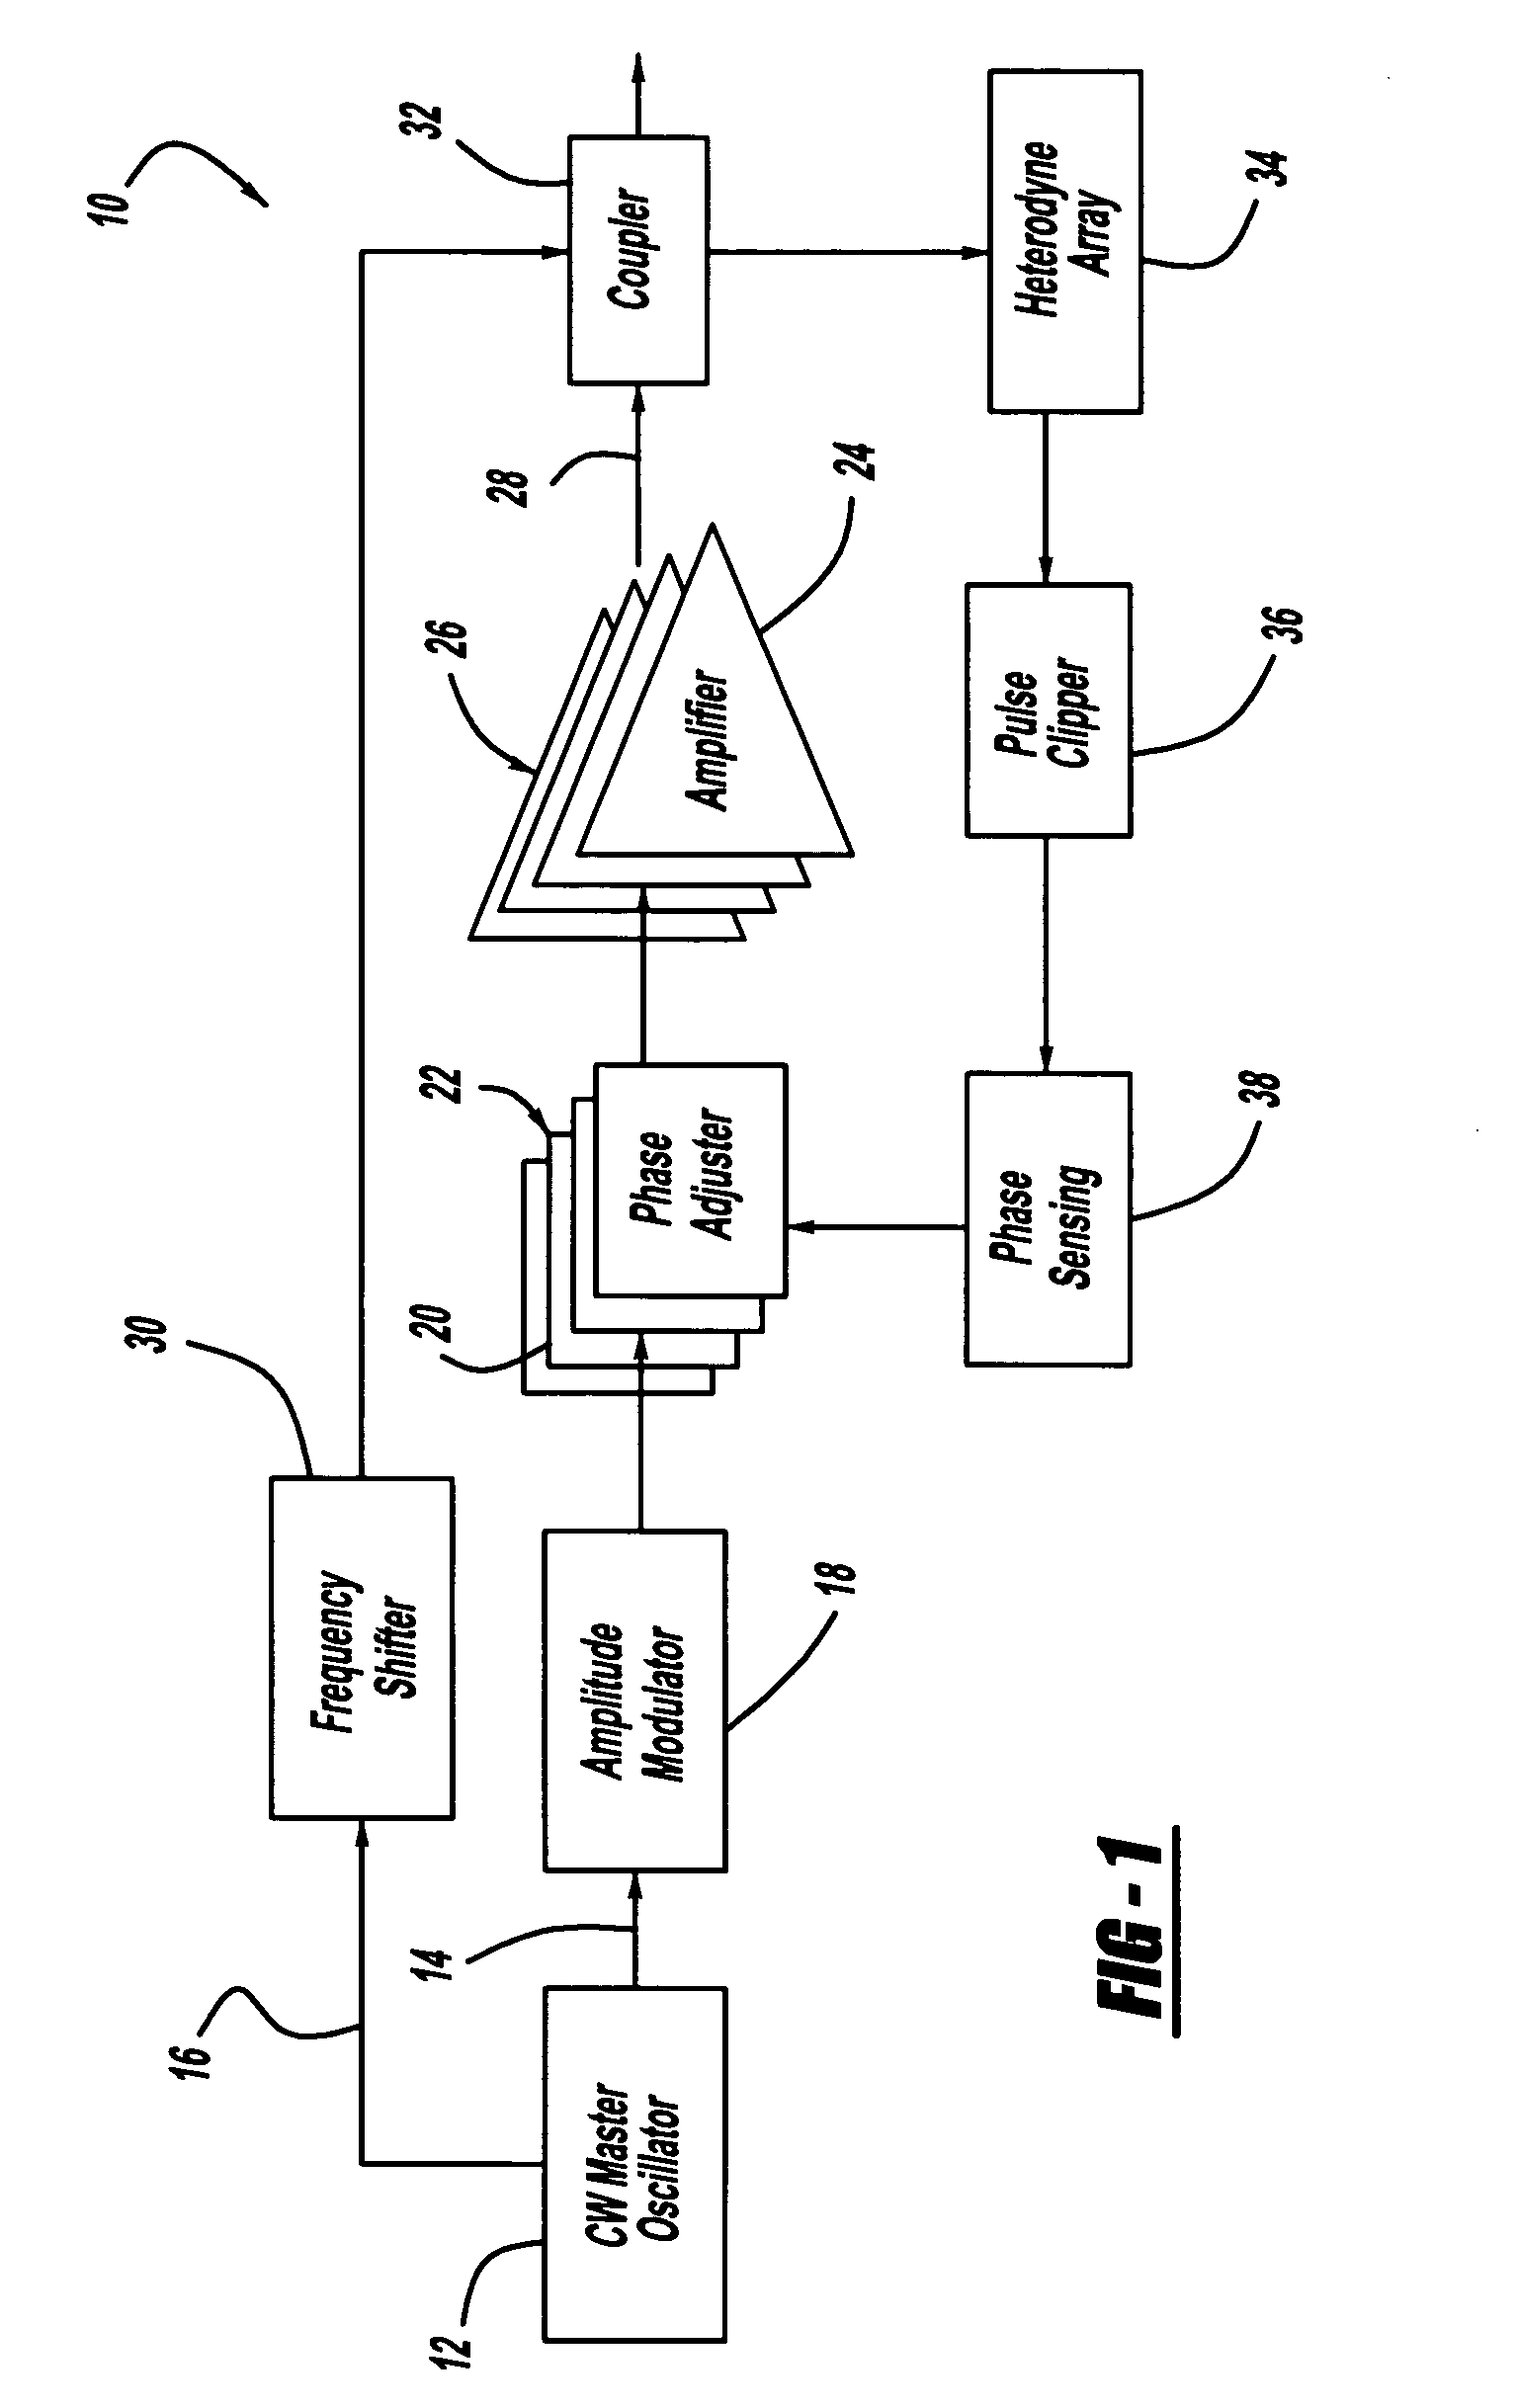 Pulsed coherent fiber array and method